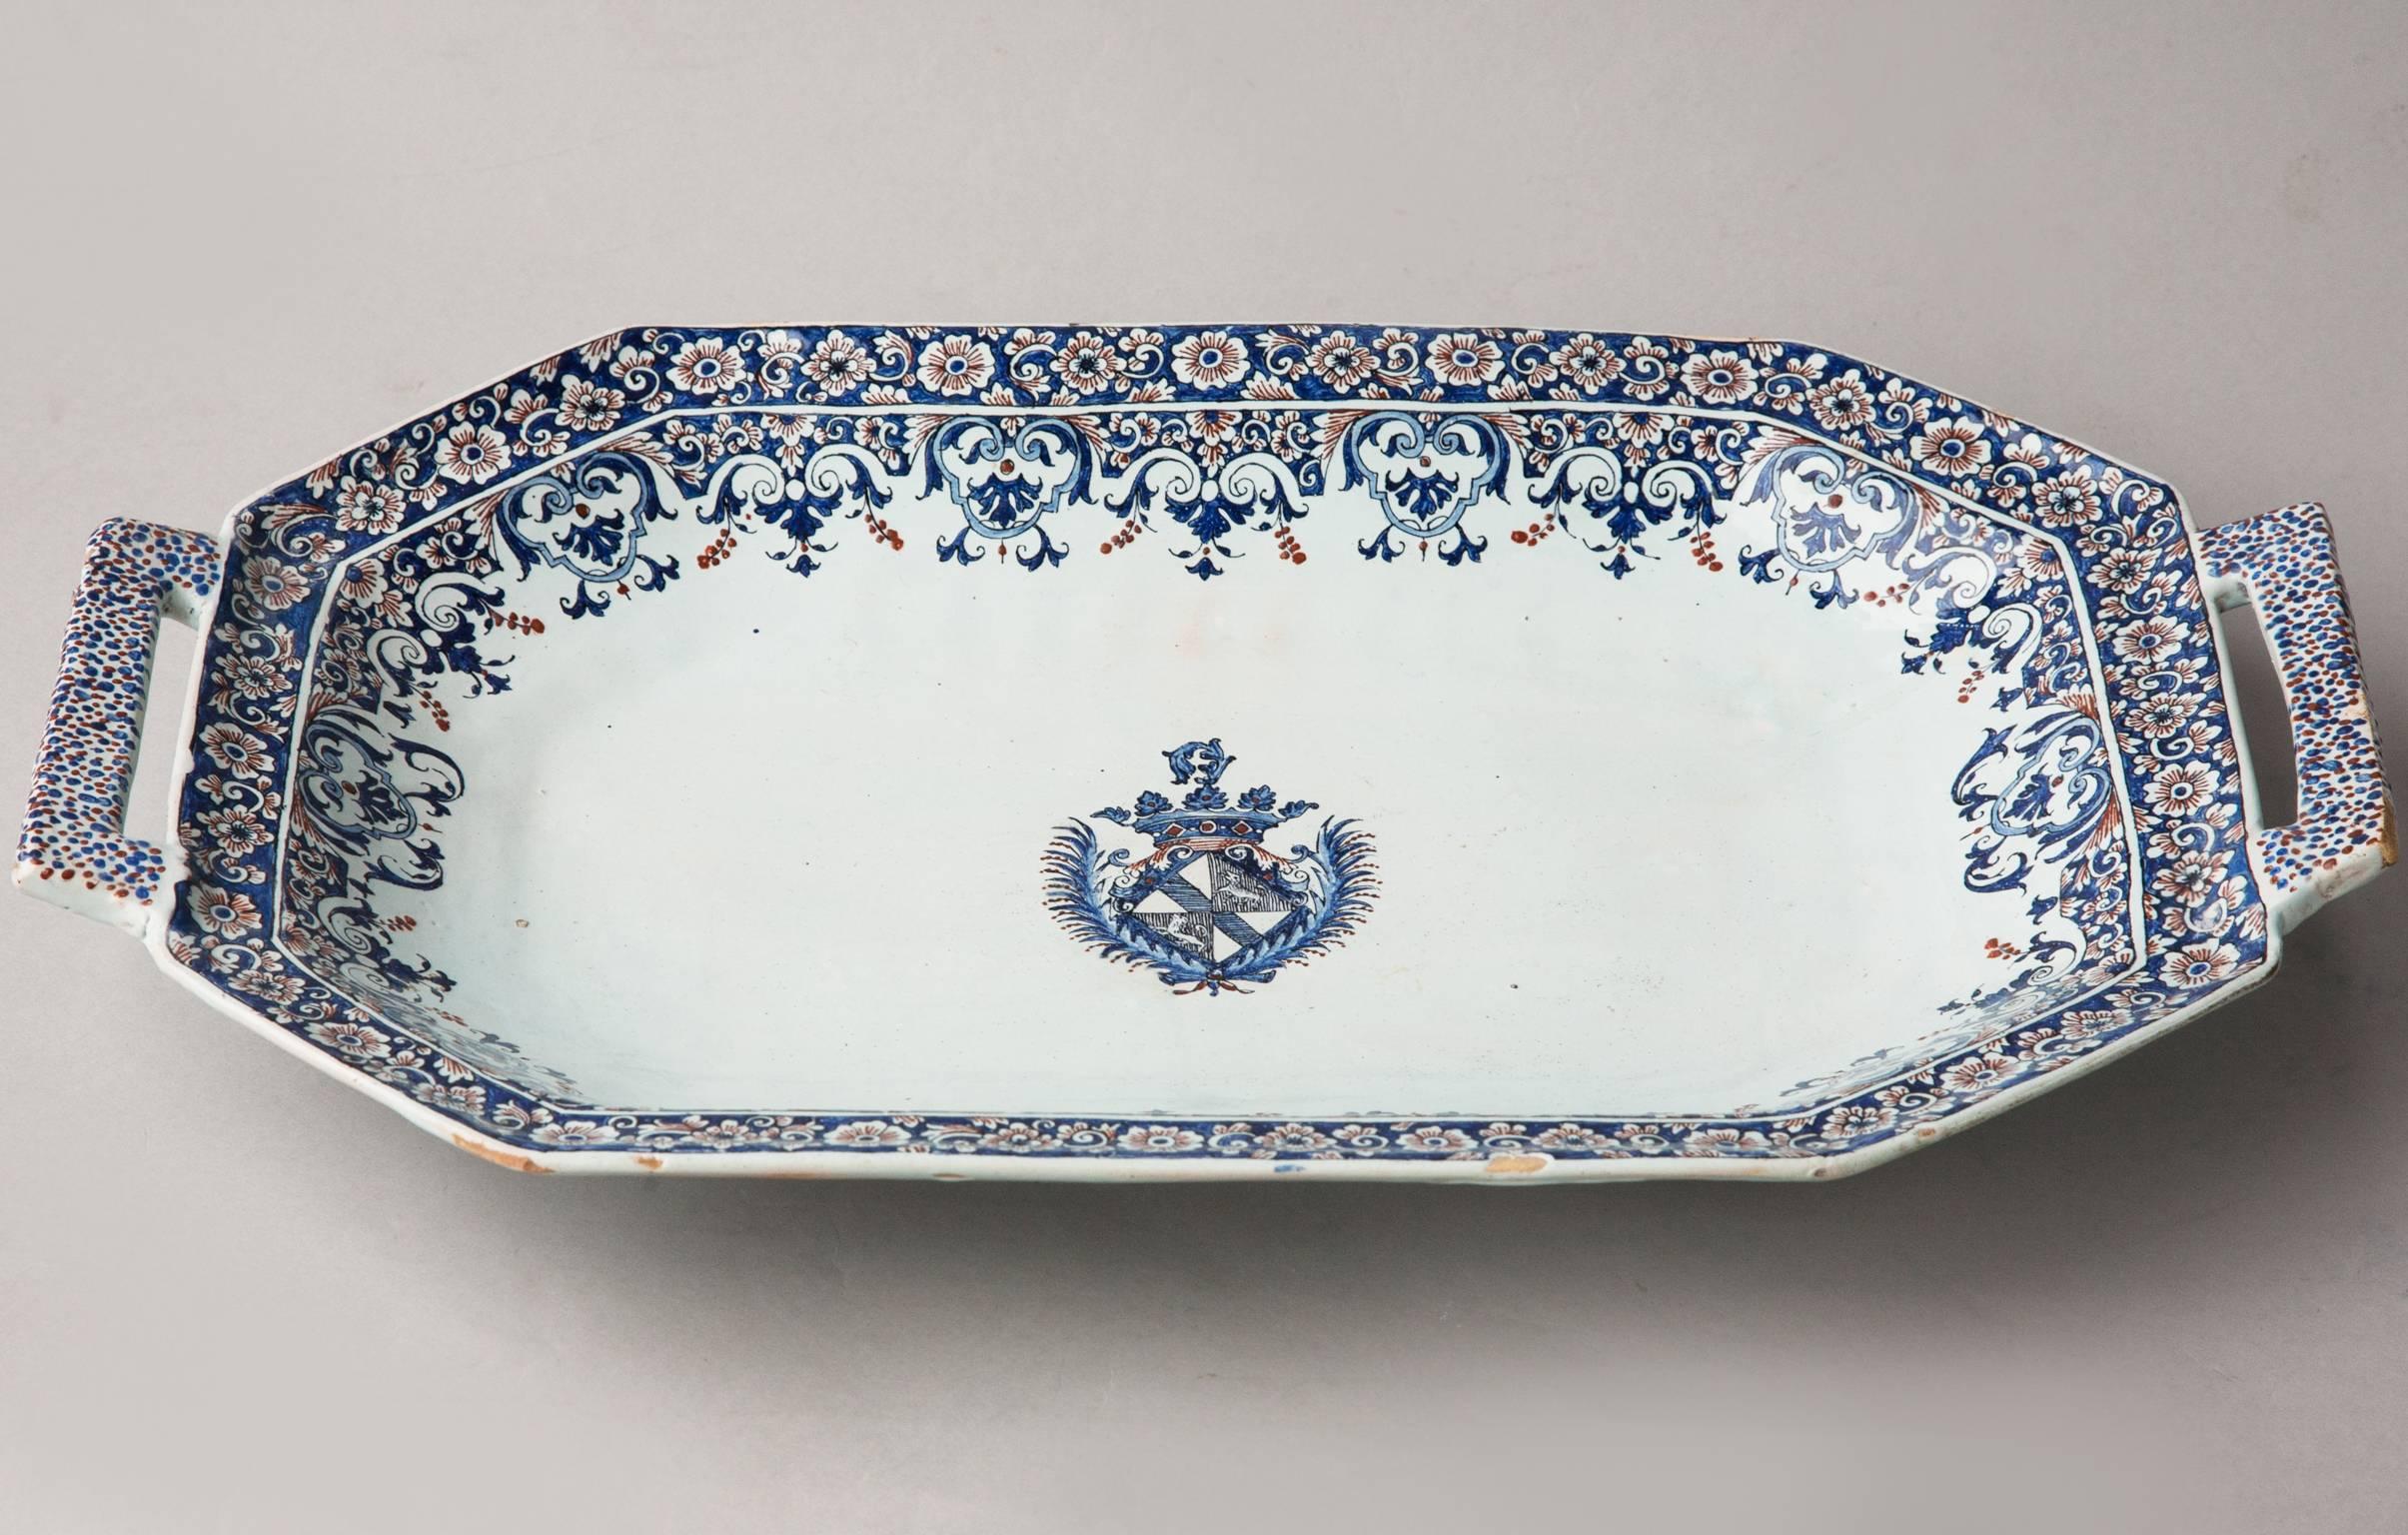 Decorated with a geometric cobalt blue and red floral border with a coat of arms at the centre. With two handles, one at each end. 
Rouen, France, circa 1710.
A small amount of restoration to the underside of the handles. 
There is a dish with